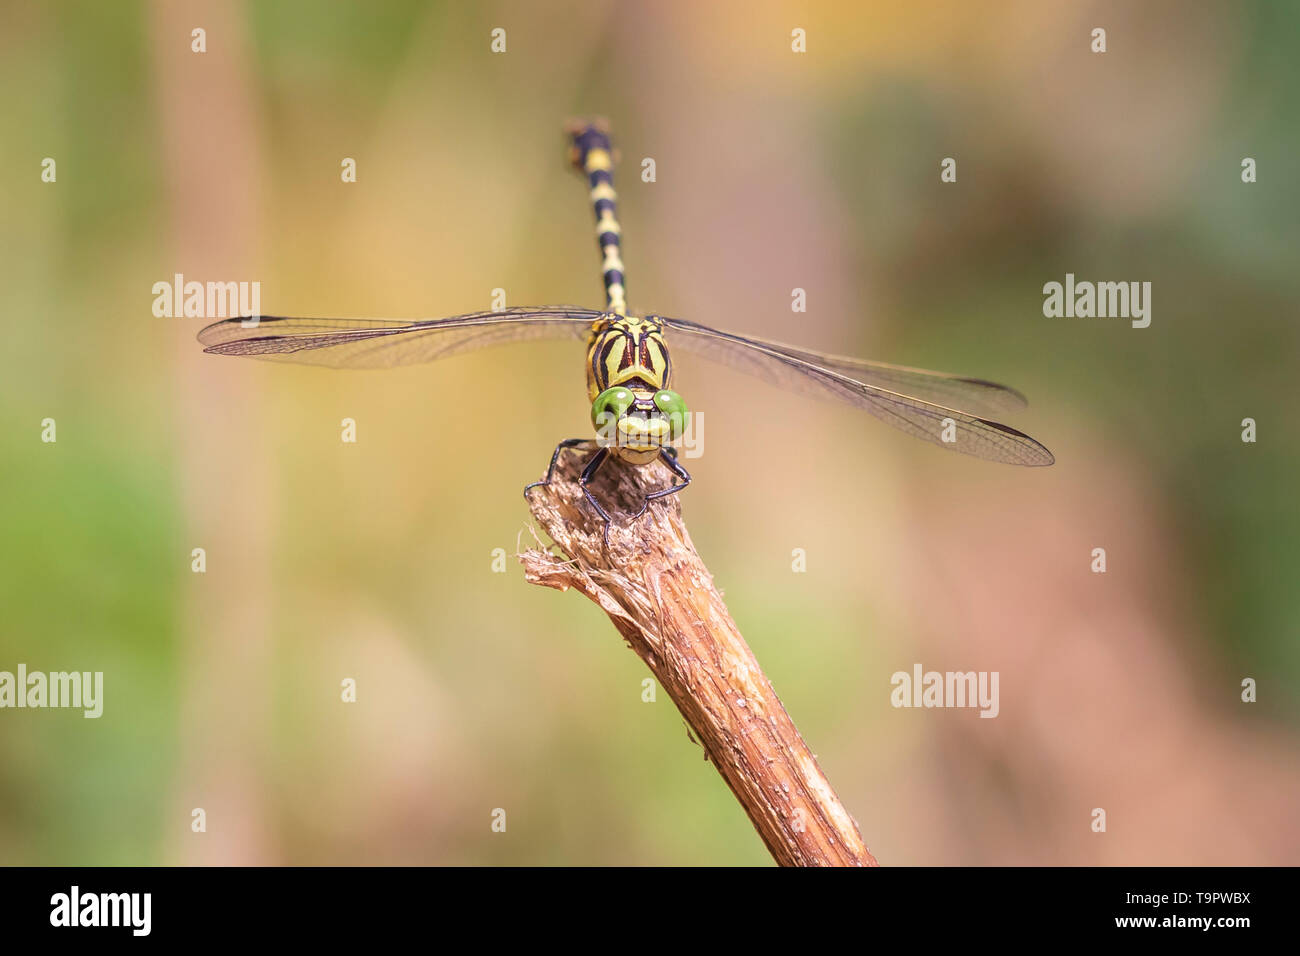 Close up of a small pincertail or green-eyed hook-tailed dragonfly, Onychogomphus forcipatus resting in sunlight on vegetation. Yellow body, green eye Stock Photo